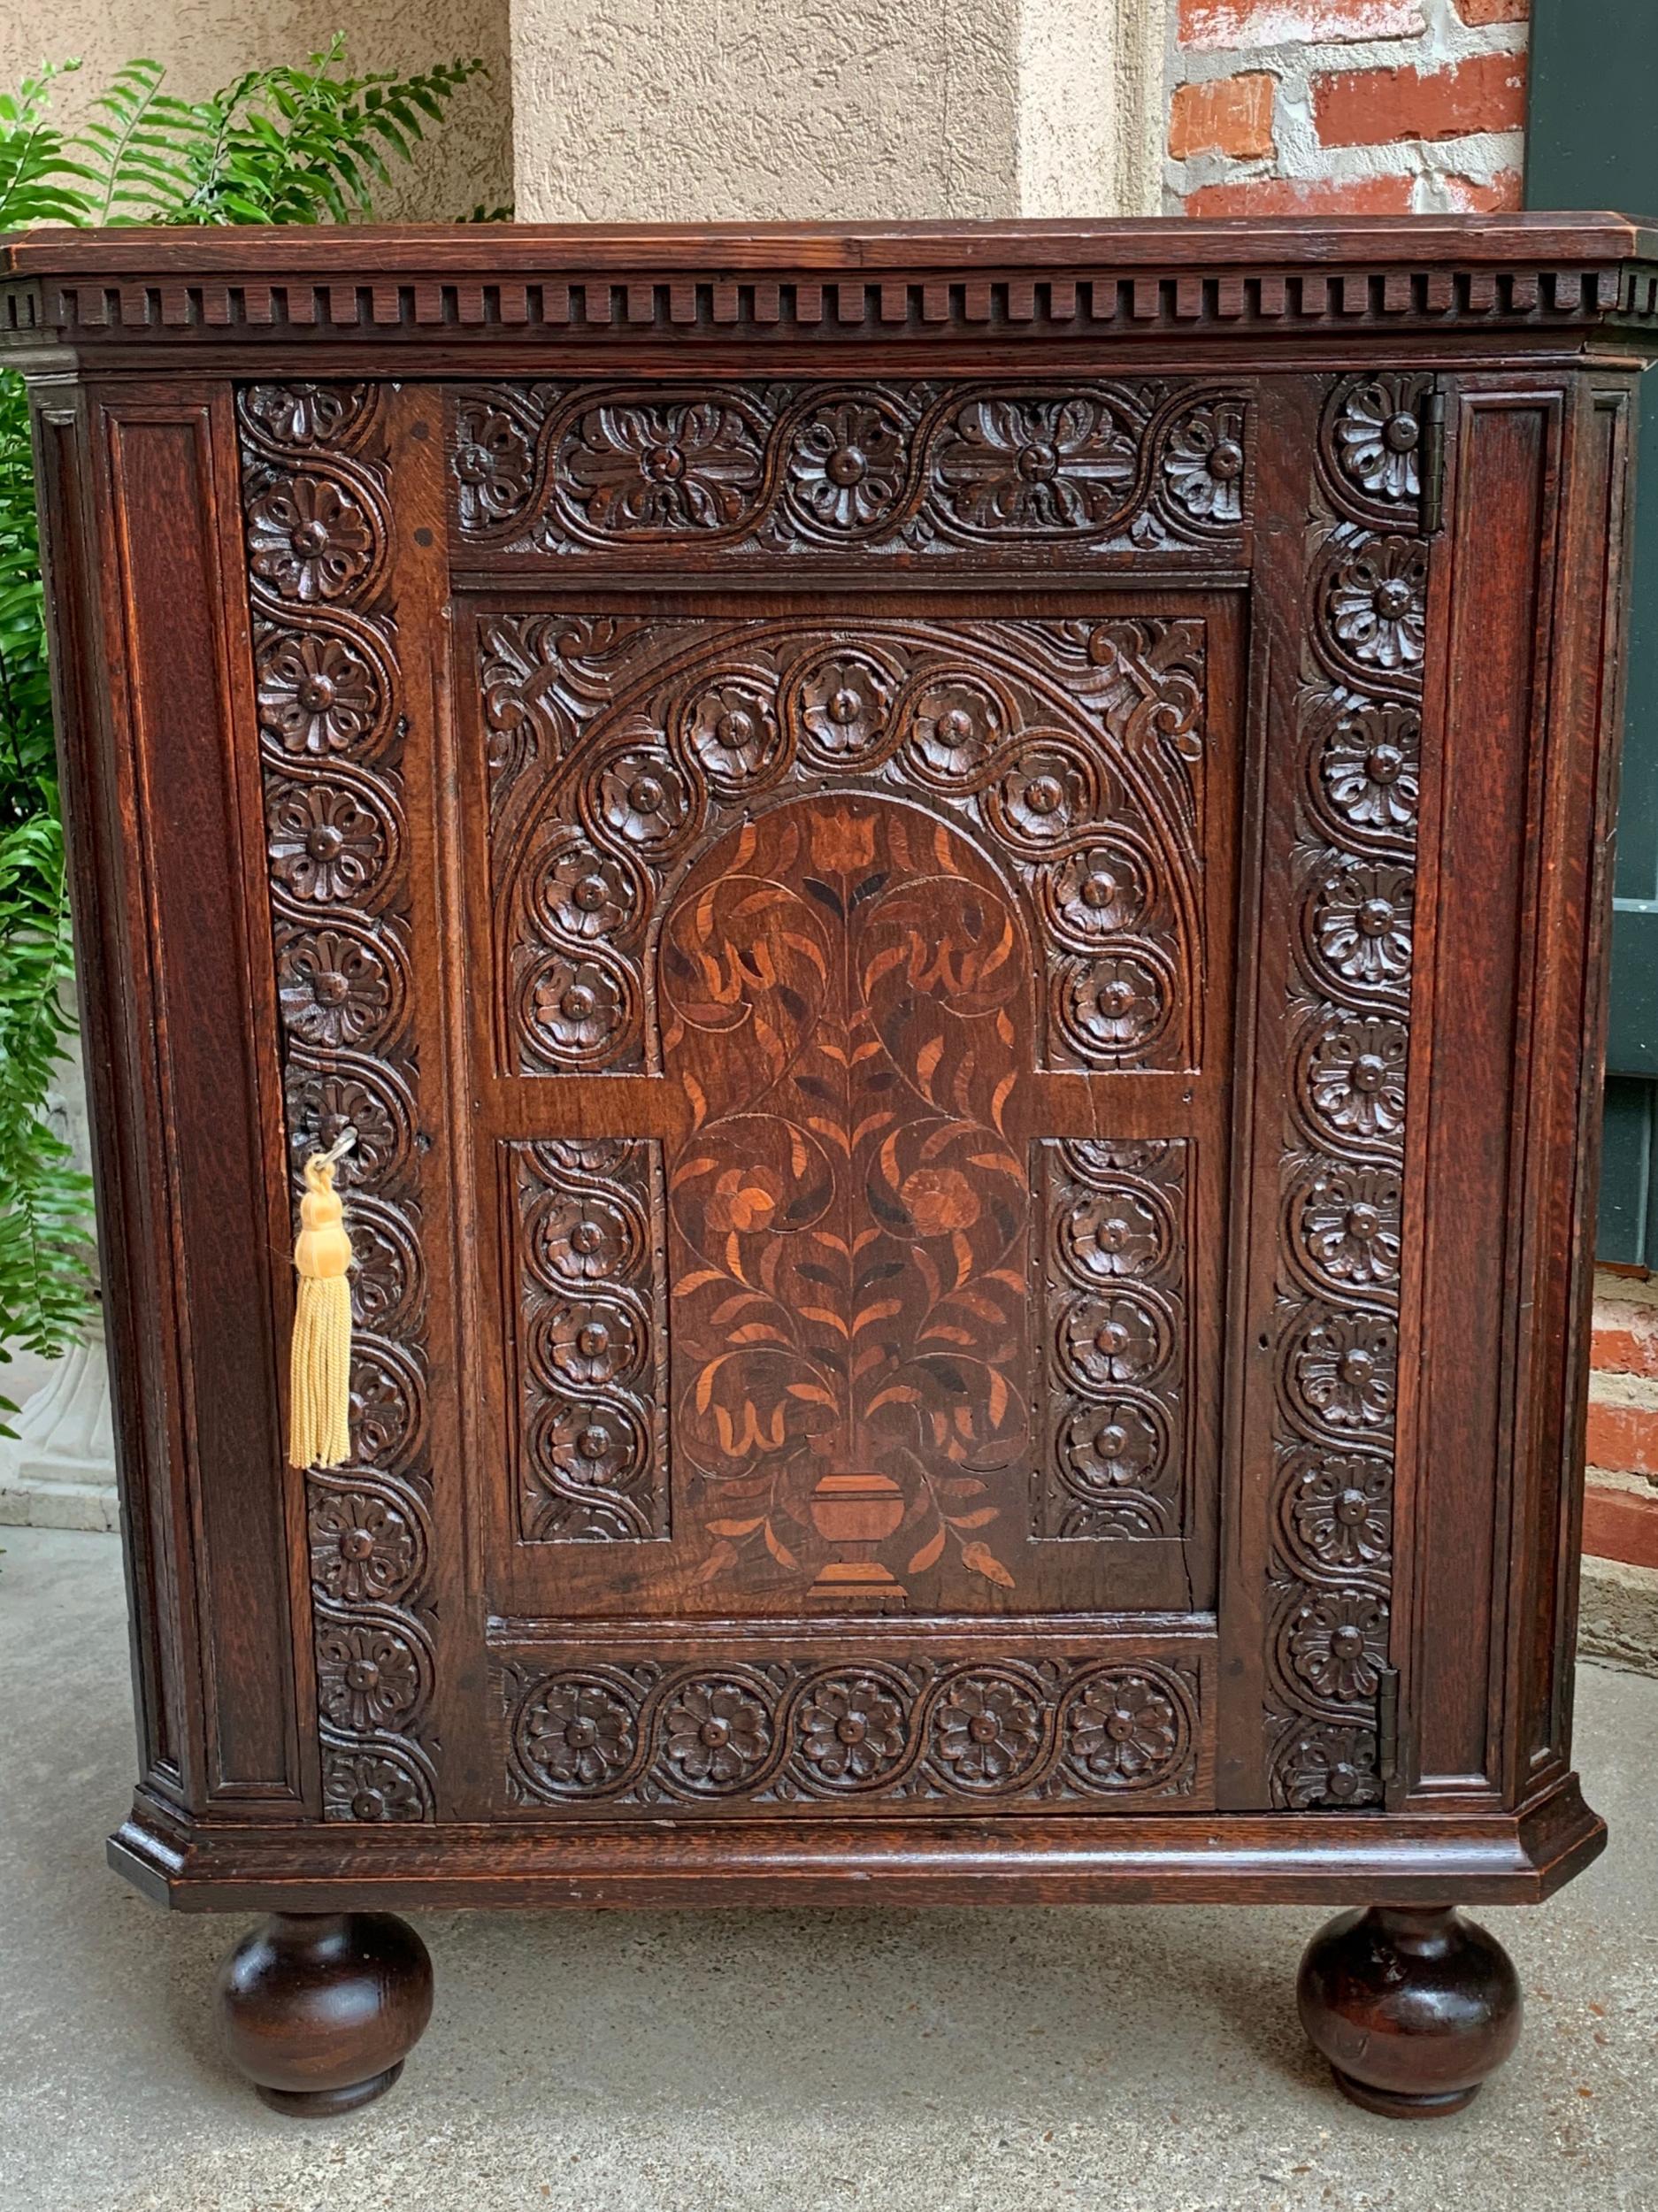 Jacobean Antique English Carved Oak Corner Cabinet Marquetry Side Table 19th Century For Sale